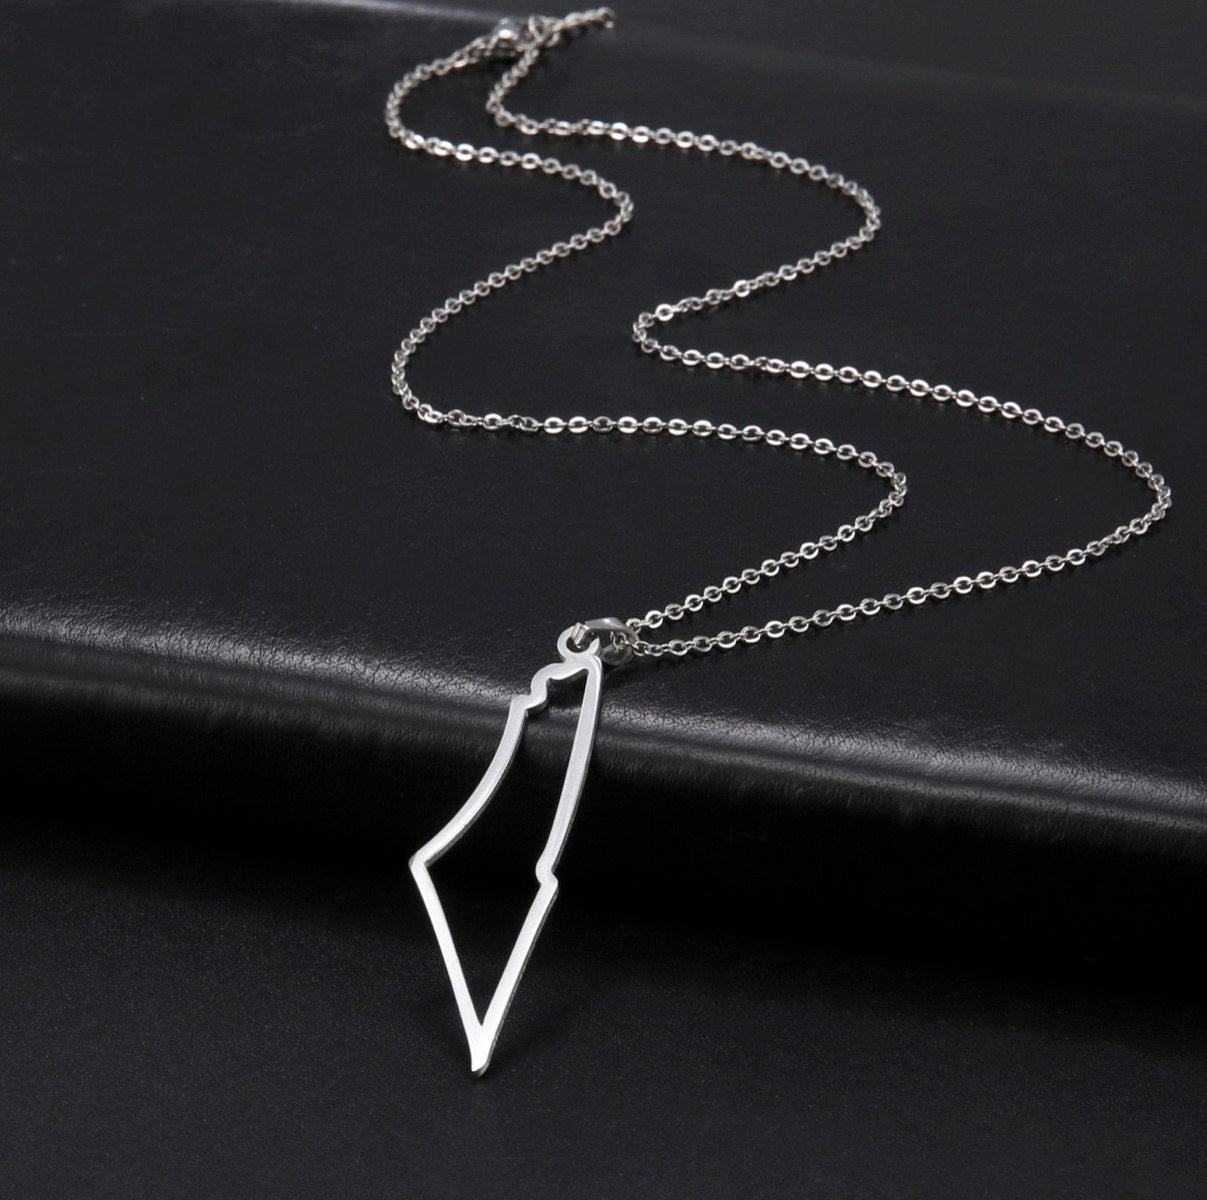 Palestine Map Silhouette Necklace - Silver